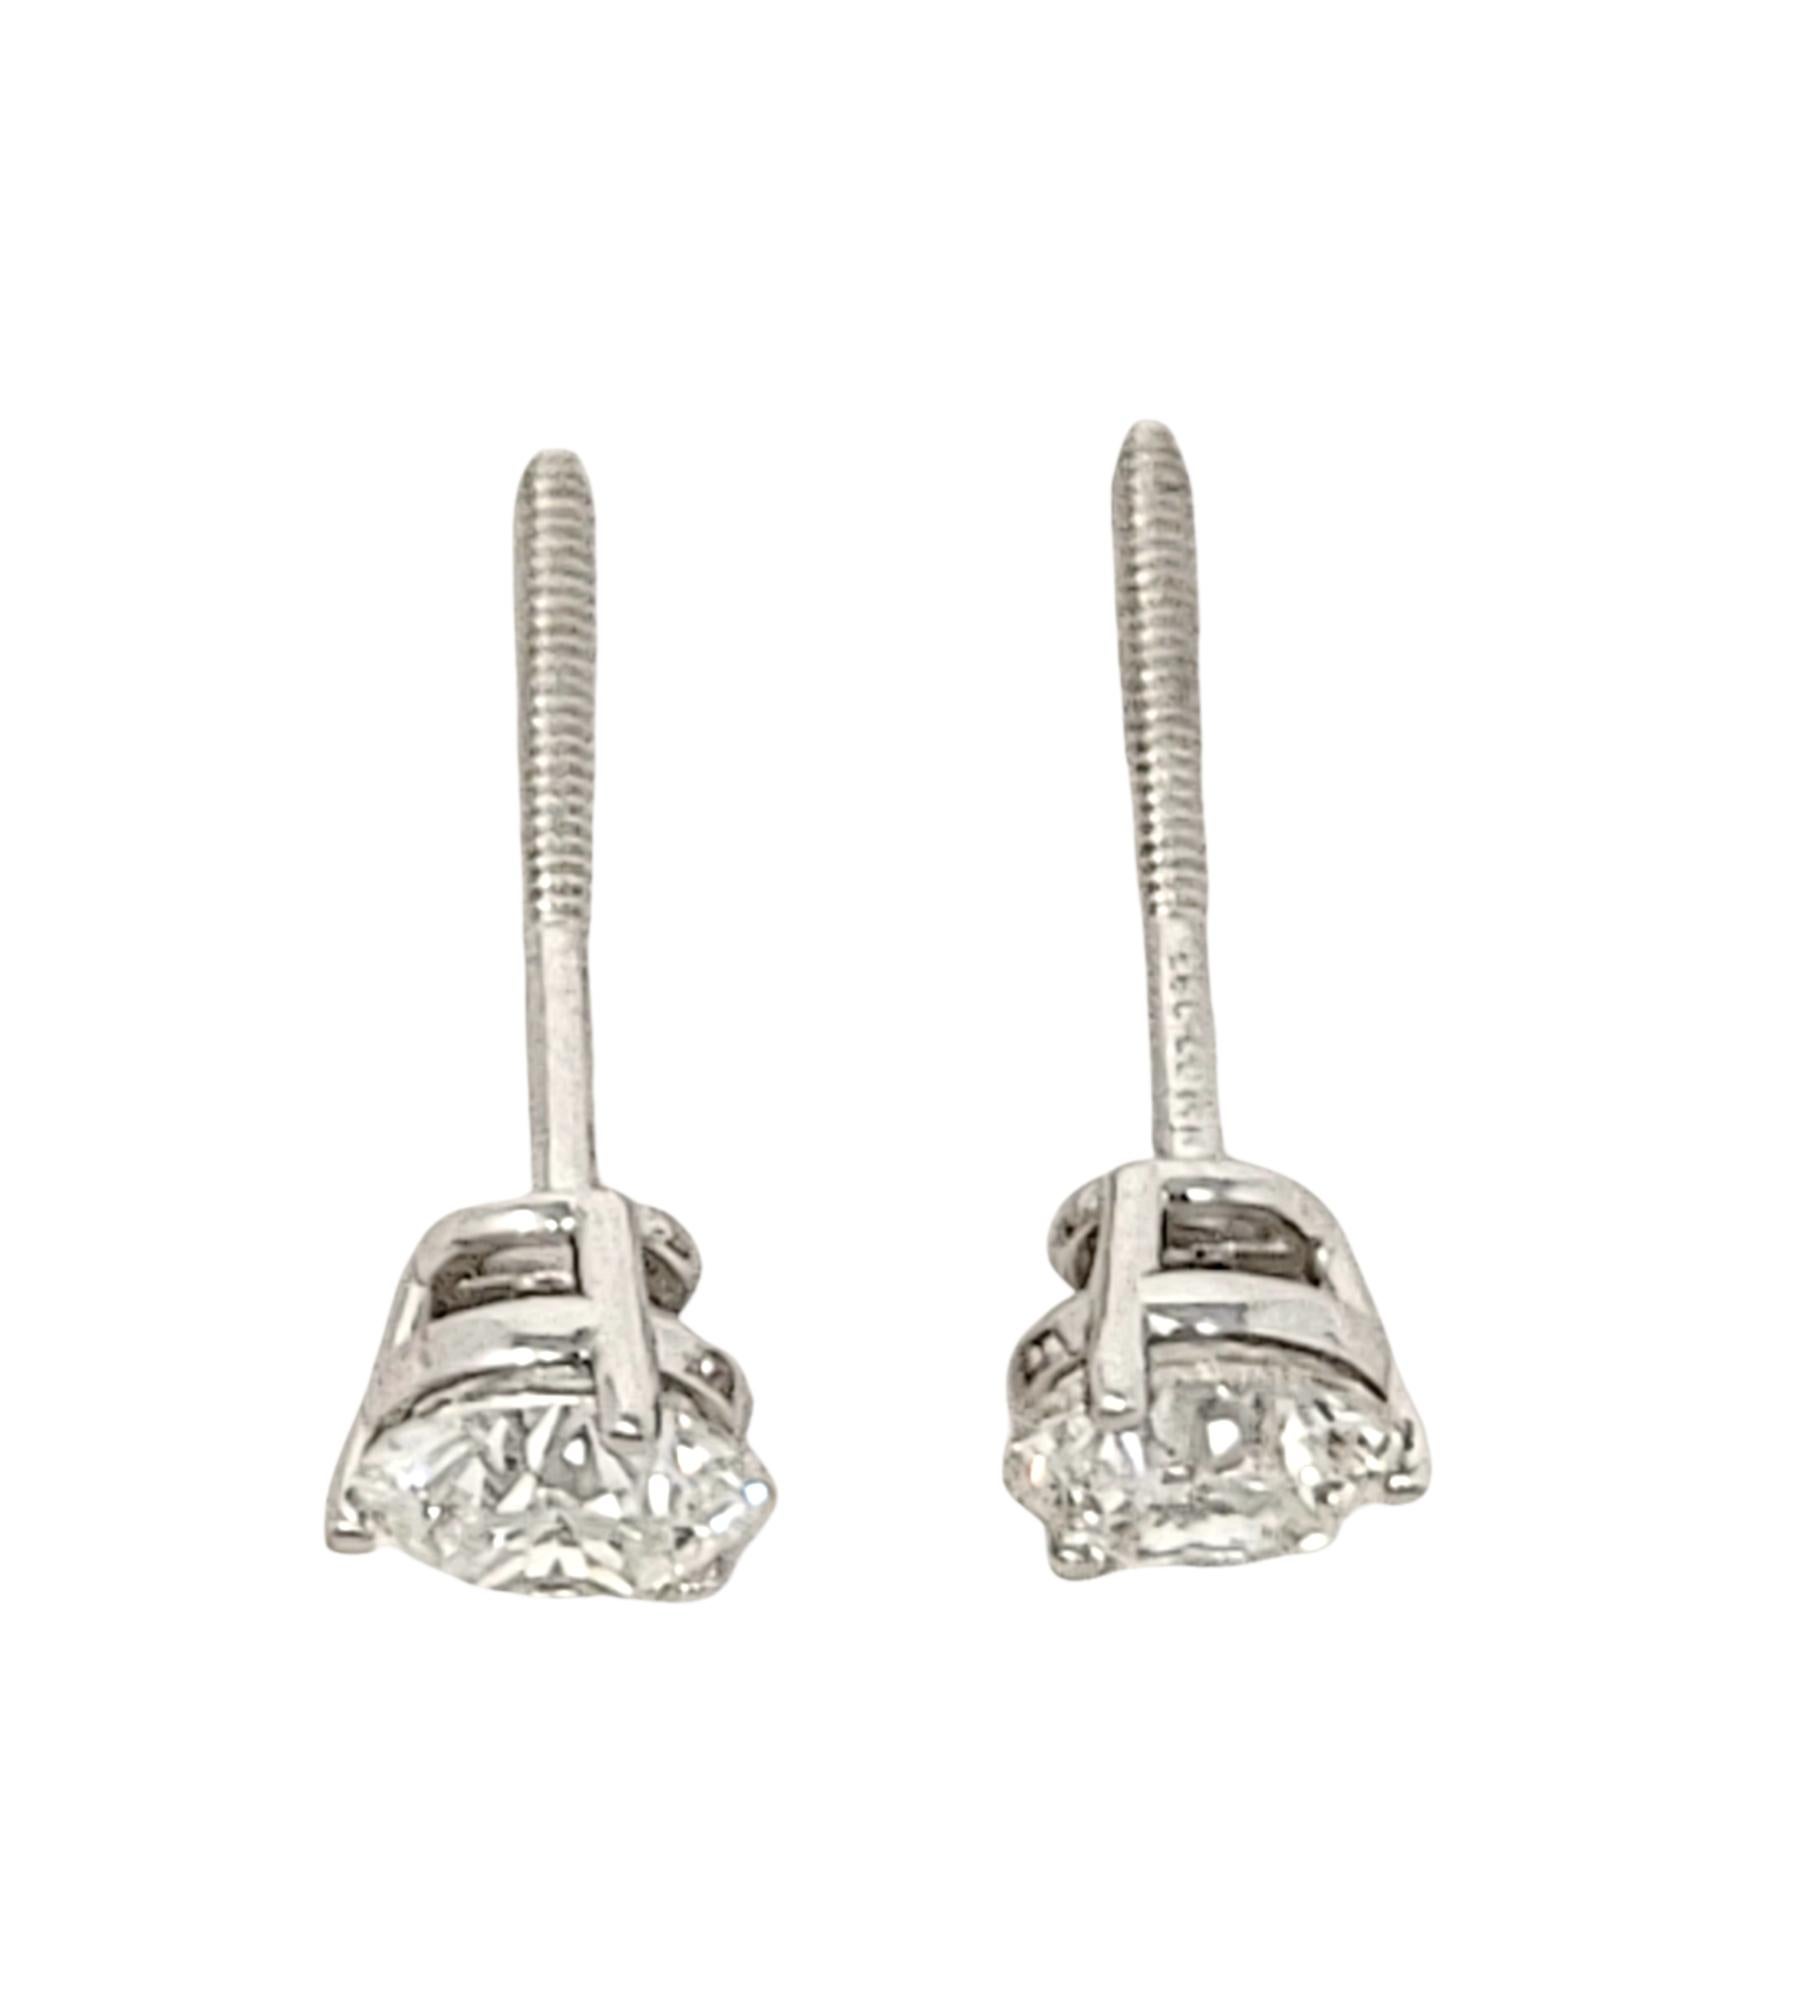 .94 Carats Total Round Leo Diamond Stud Earrings in White Gold 3 Prong Setting For Sale 1